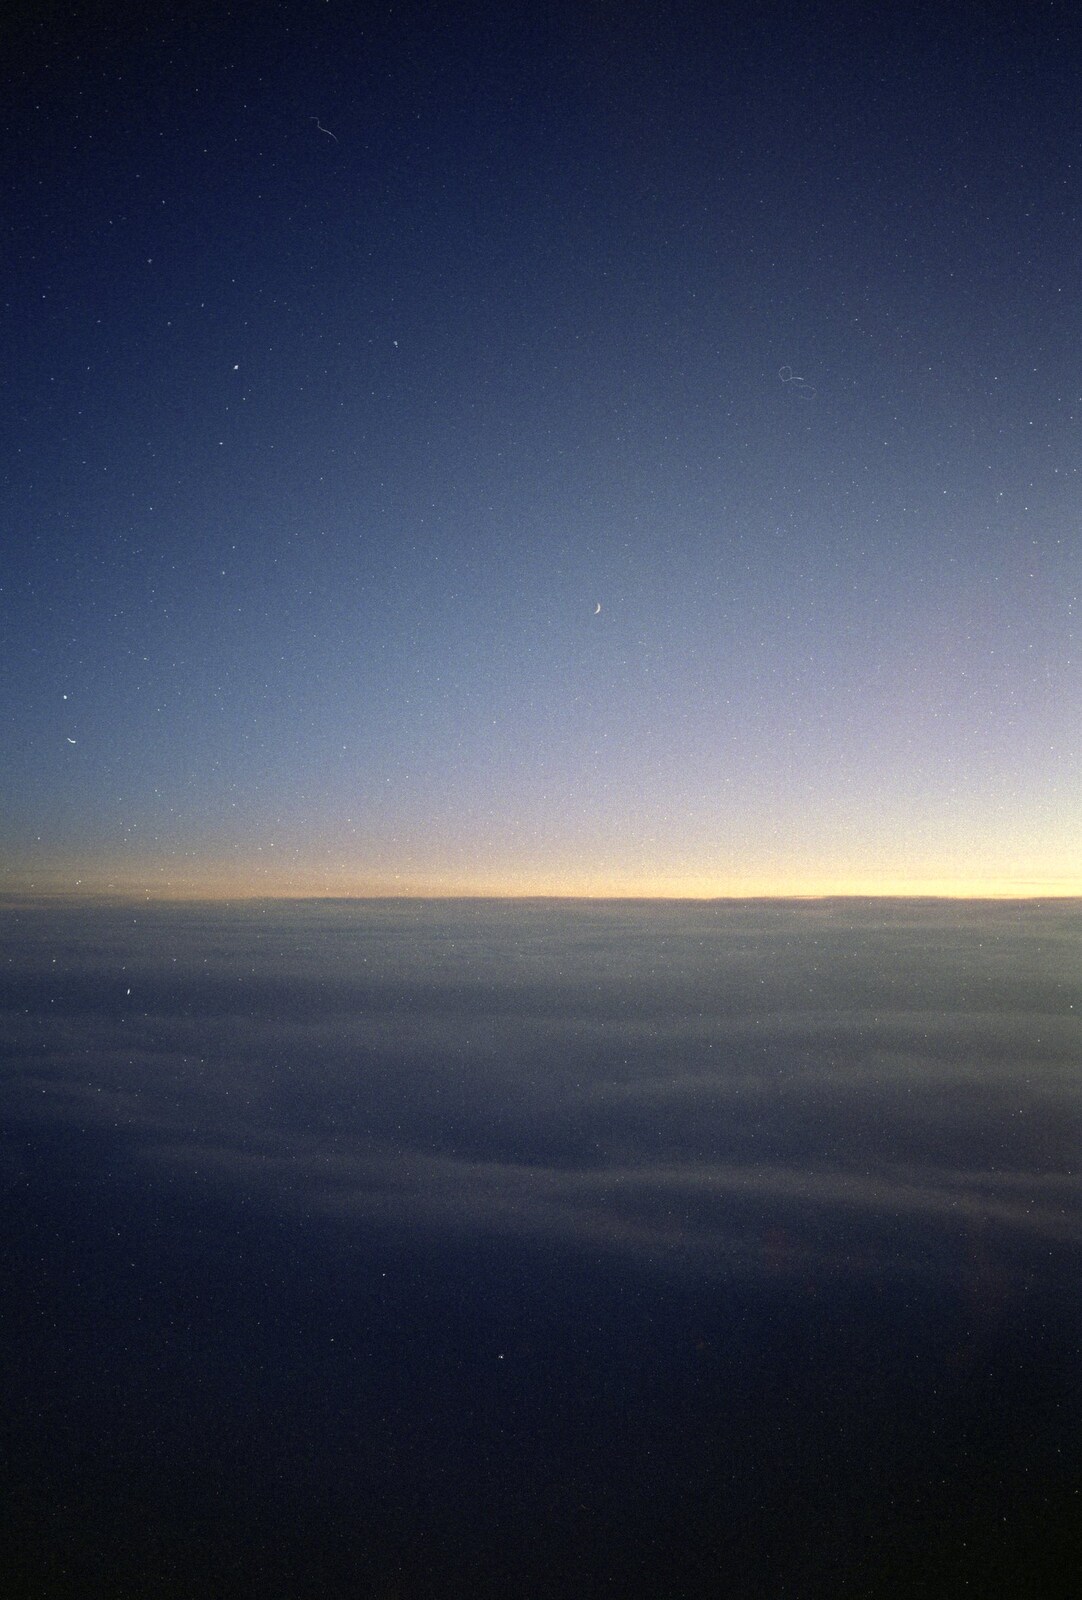 The view from the cockpit window at 35,000 feet from A 747 Cockpit, Honolulu and Pearl Harbor, O'ahu, Hawai'i, United States - 20th November 1992